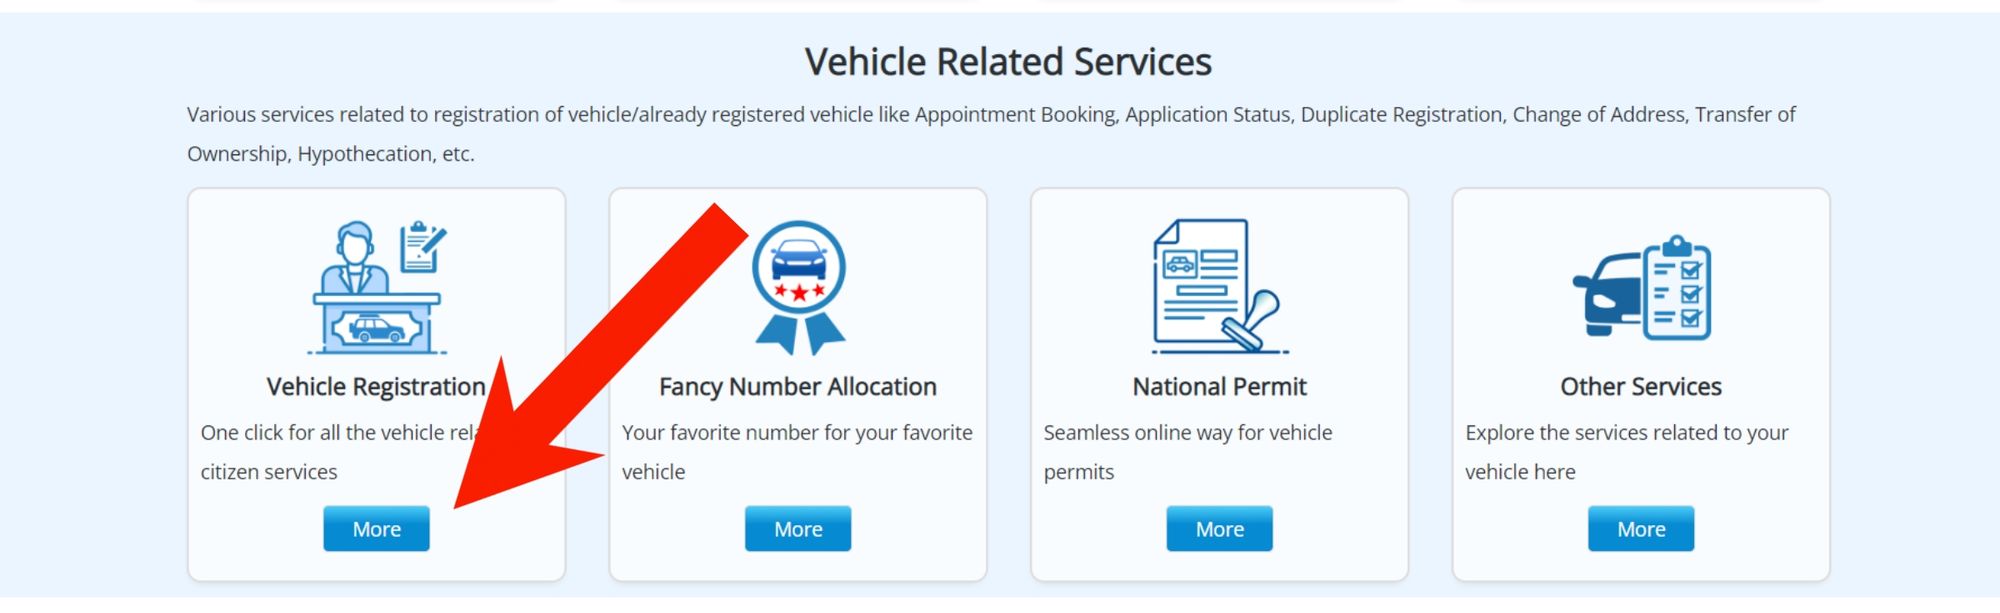 Vehicle Related Services